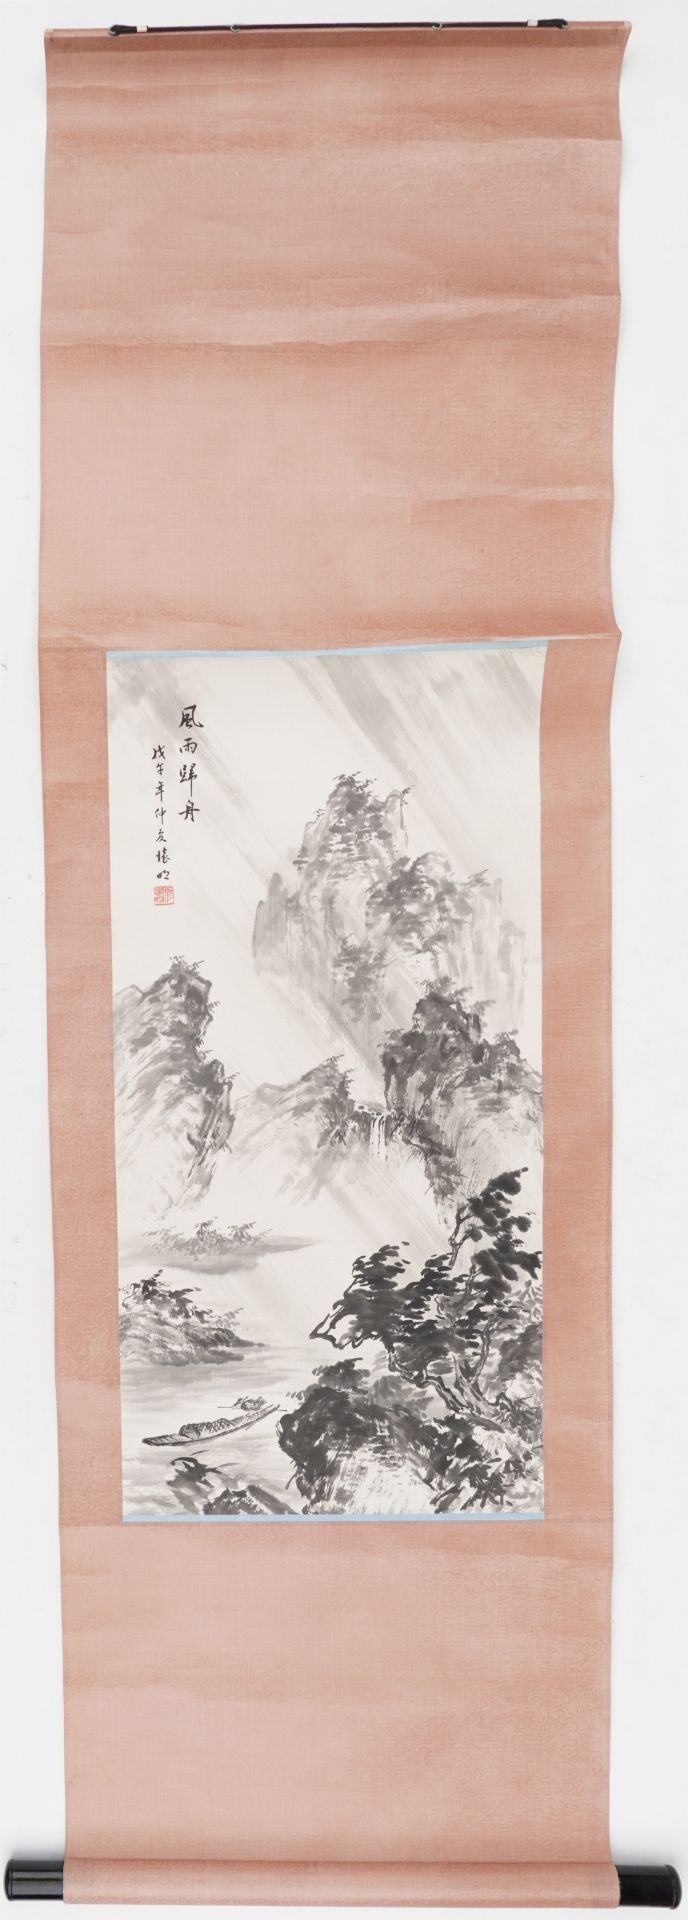 Chinese wall hanging scroll hand painted with a mountainous landscape, 68cm x 32cm - Image 3 of 10